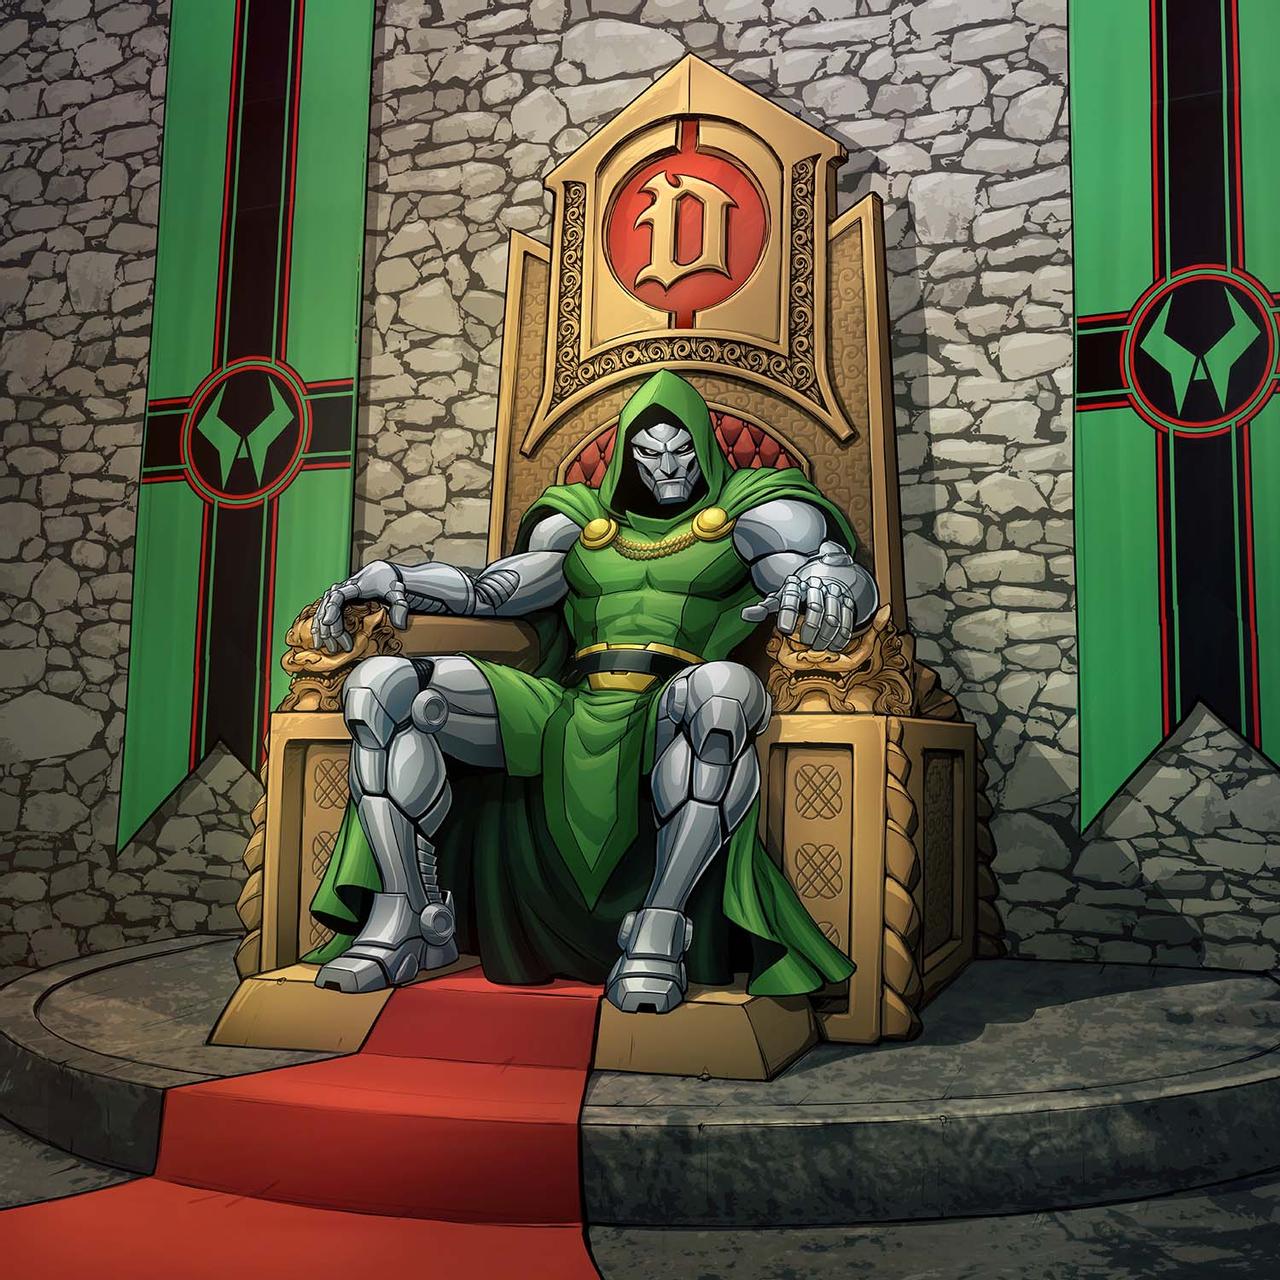 Dr Doom on the Throne by Patrick Brown